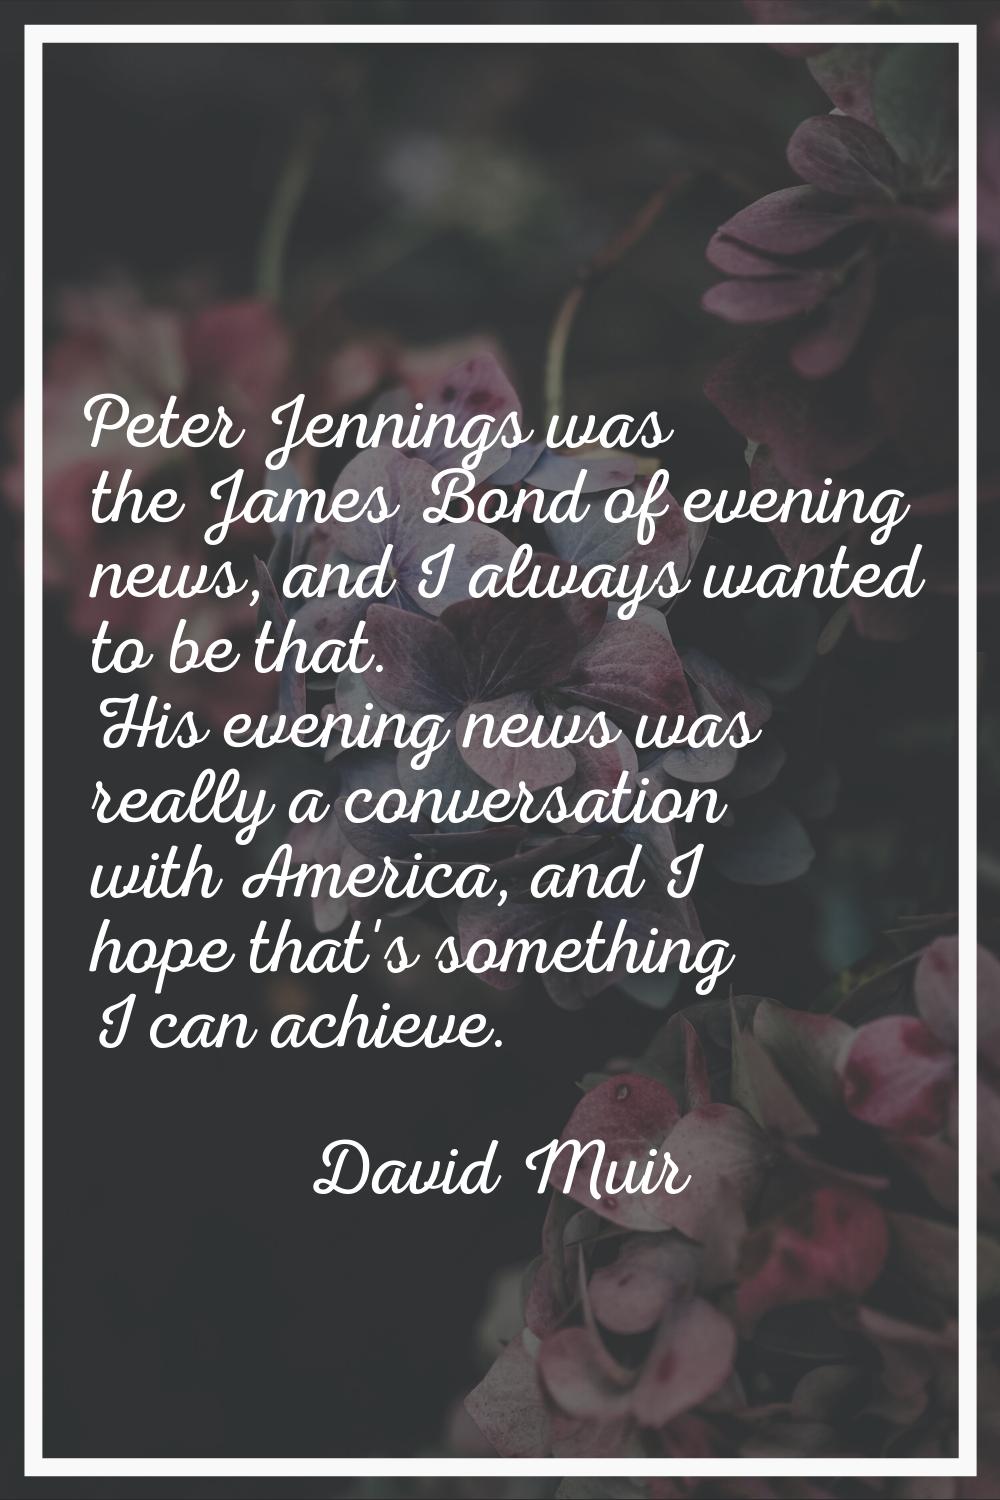 Peter Jennings was the James Bond of evening news, and I always wanted to be that. His evening news